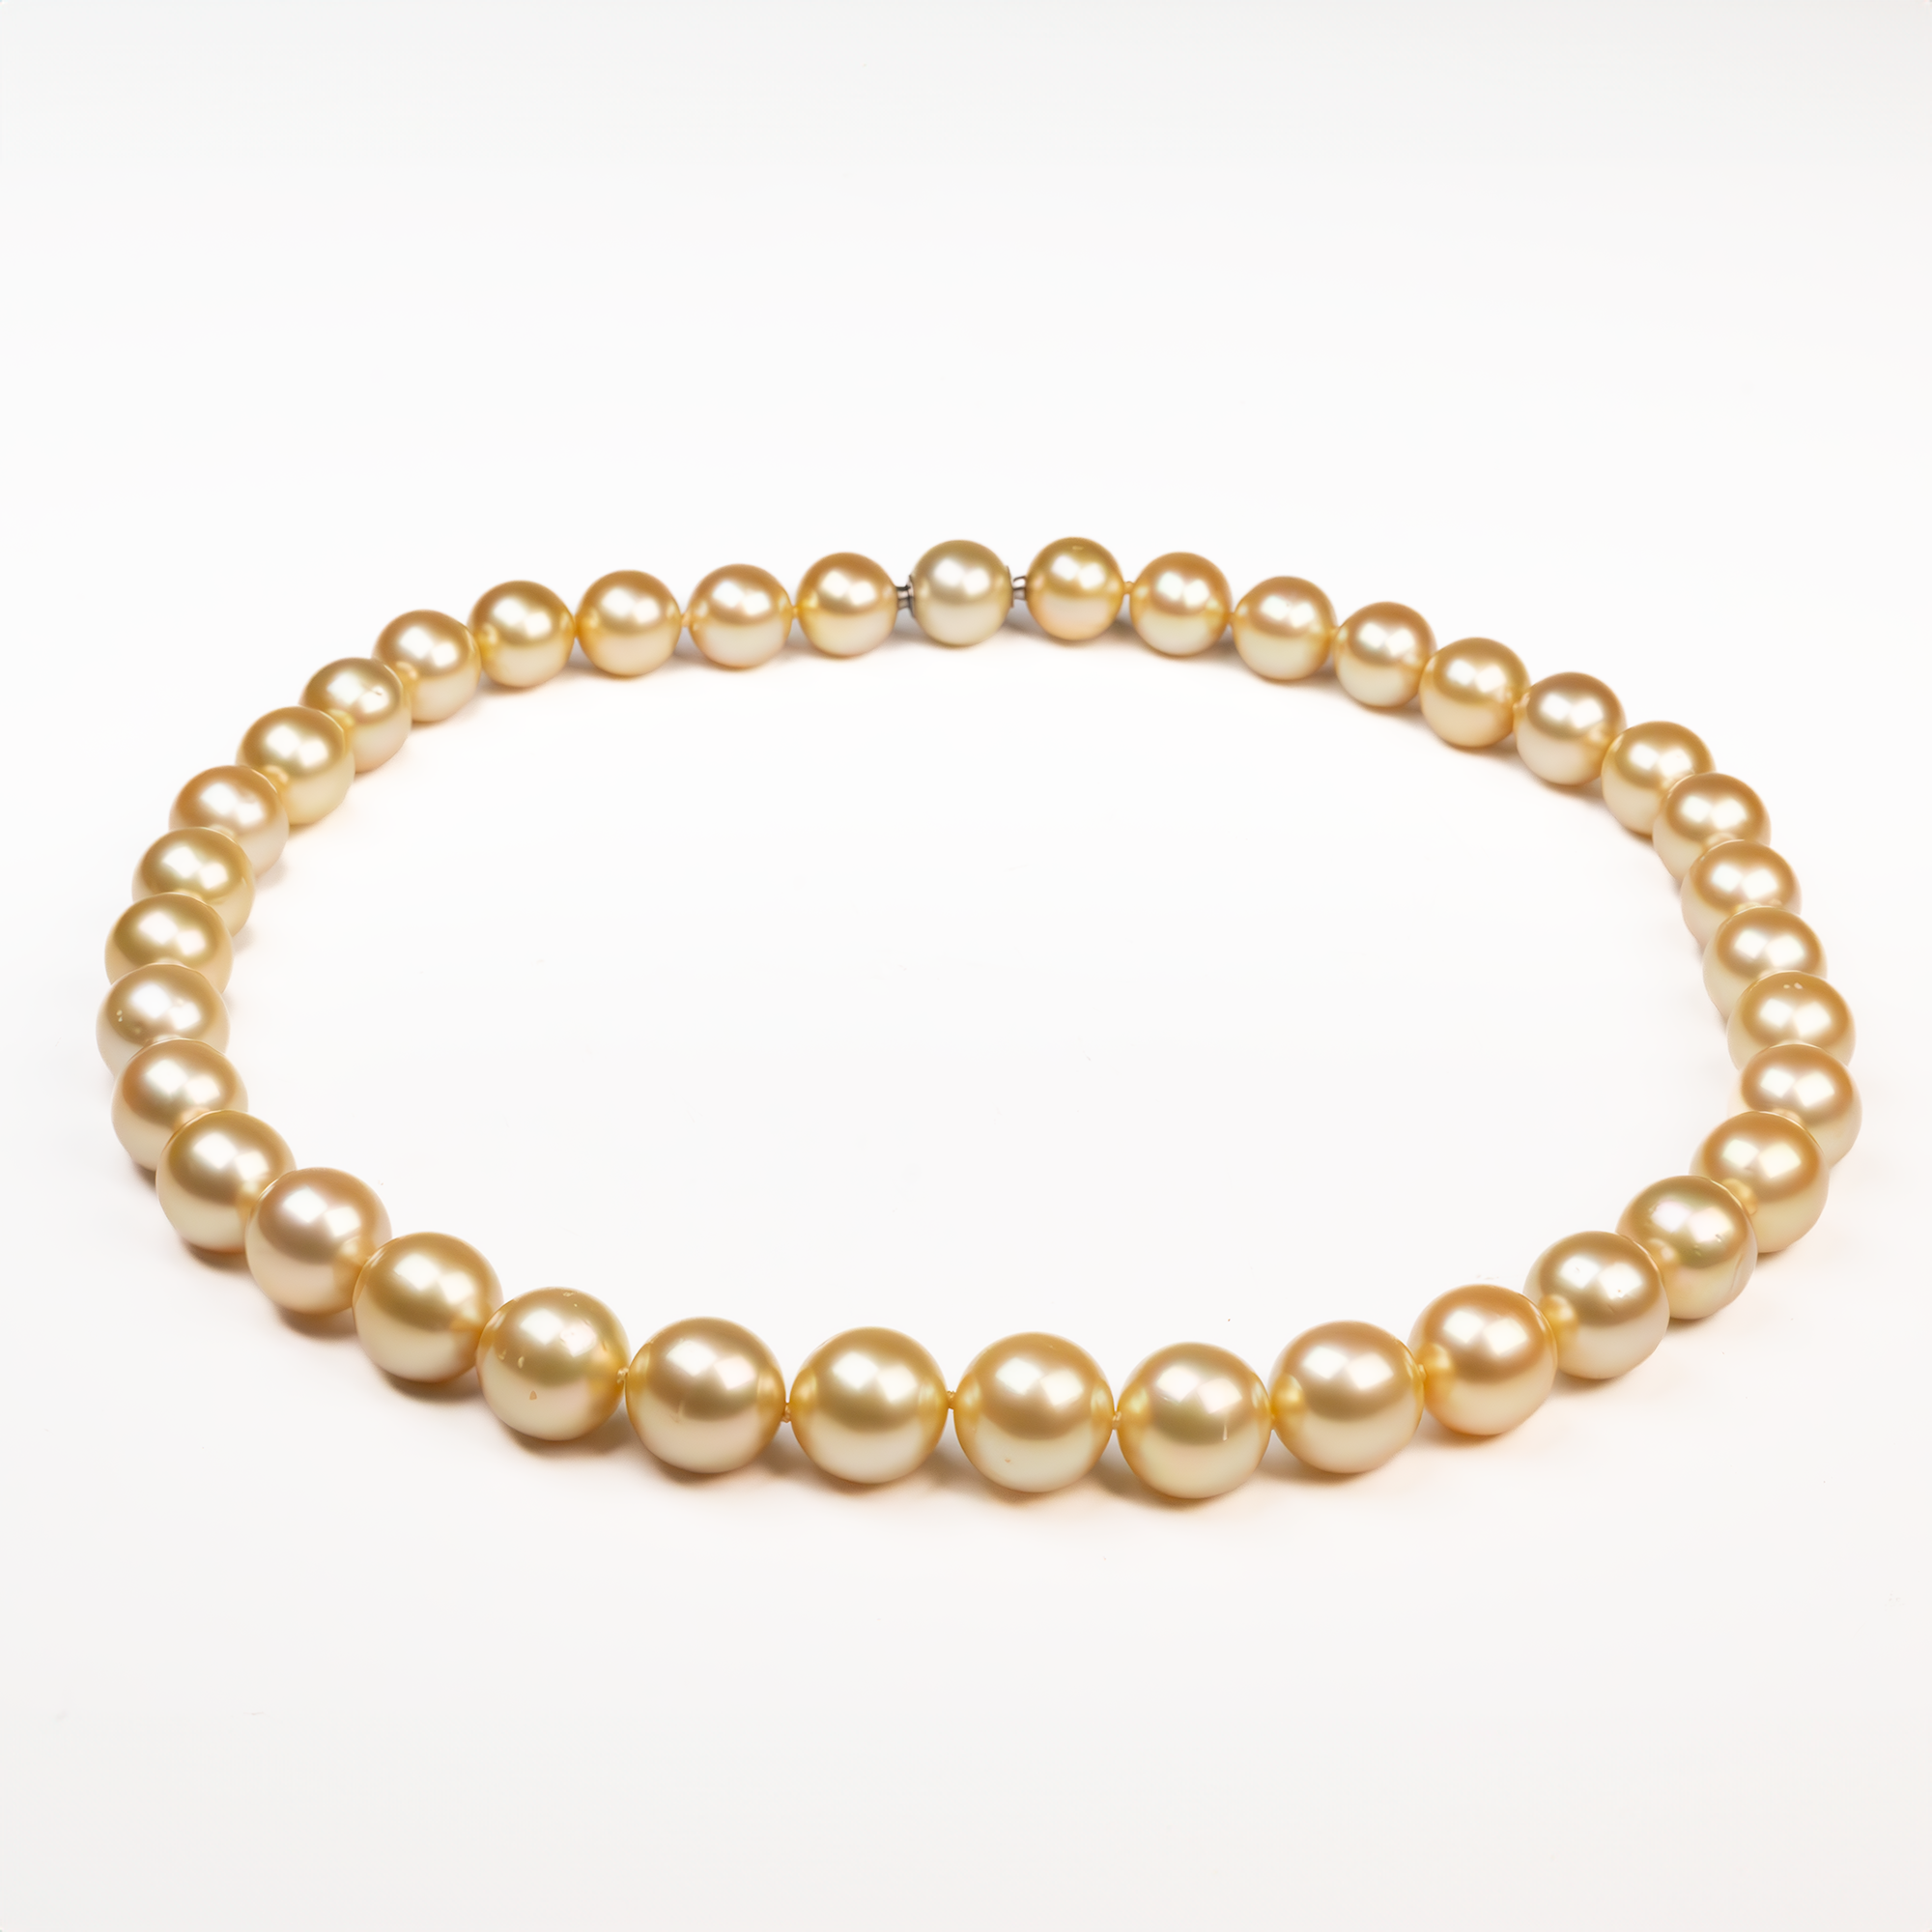 Stainless Steel South Sea Cultured 10.0-12.55mm 44.5cm Pearl Strand